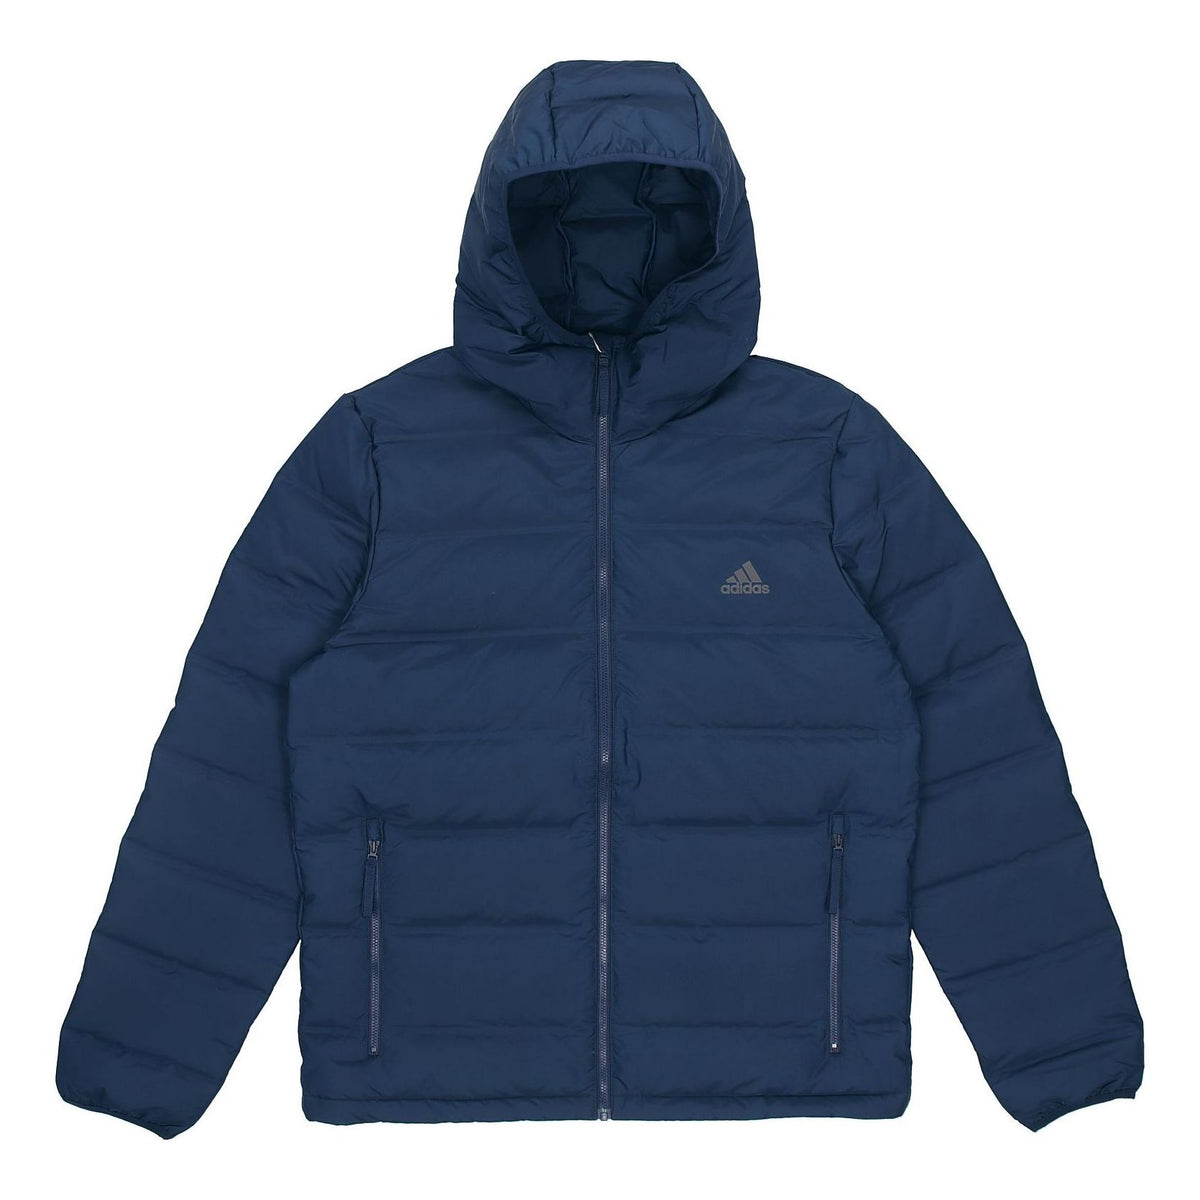 adidas protection against cold Stay Warm hooded down Jacket Navy Blue ...